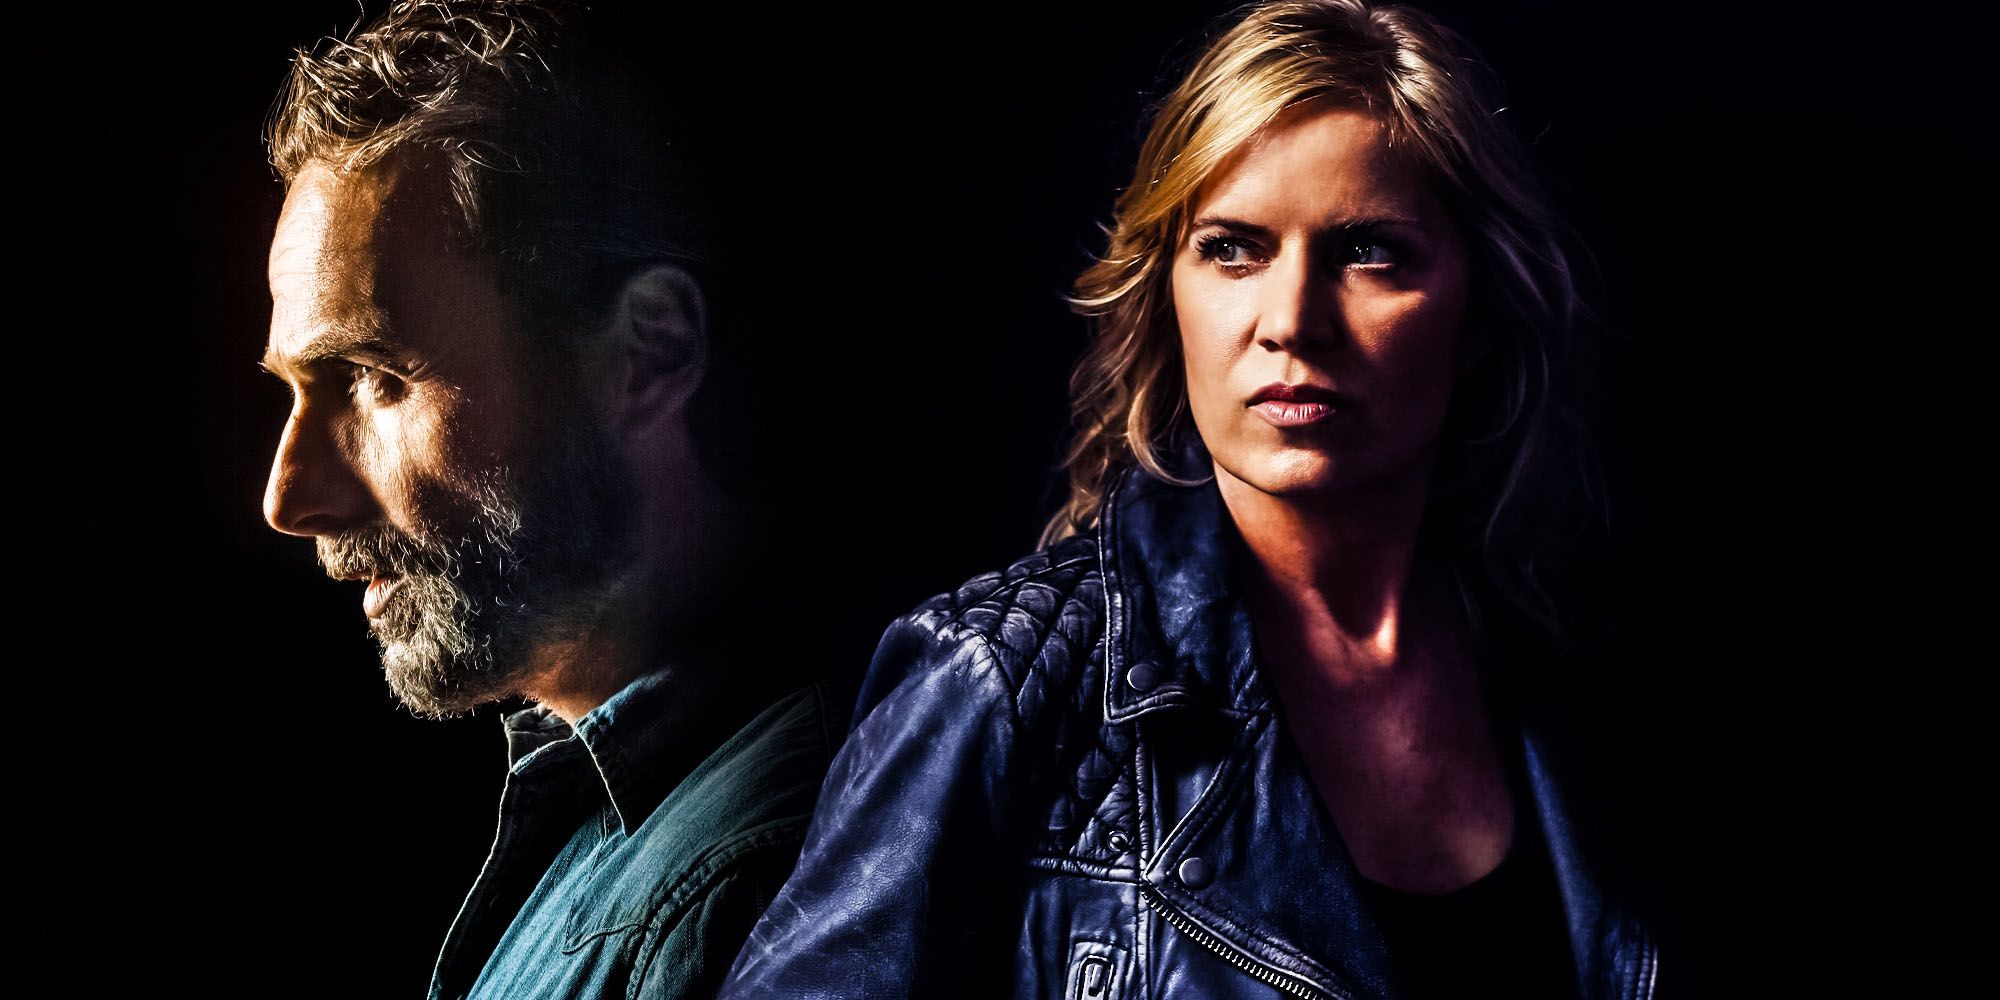 Fear the walking dead hints what happened to Rick grimes Brainwashed Madison